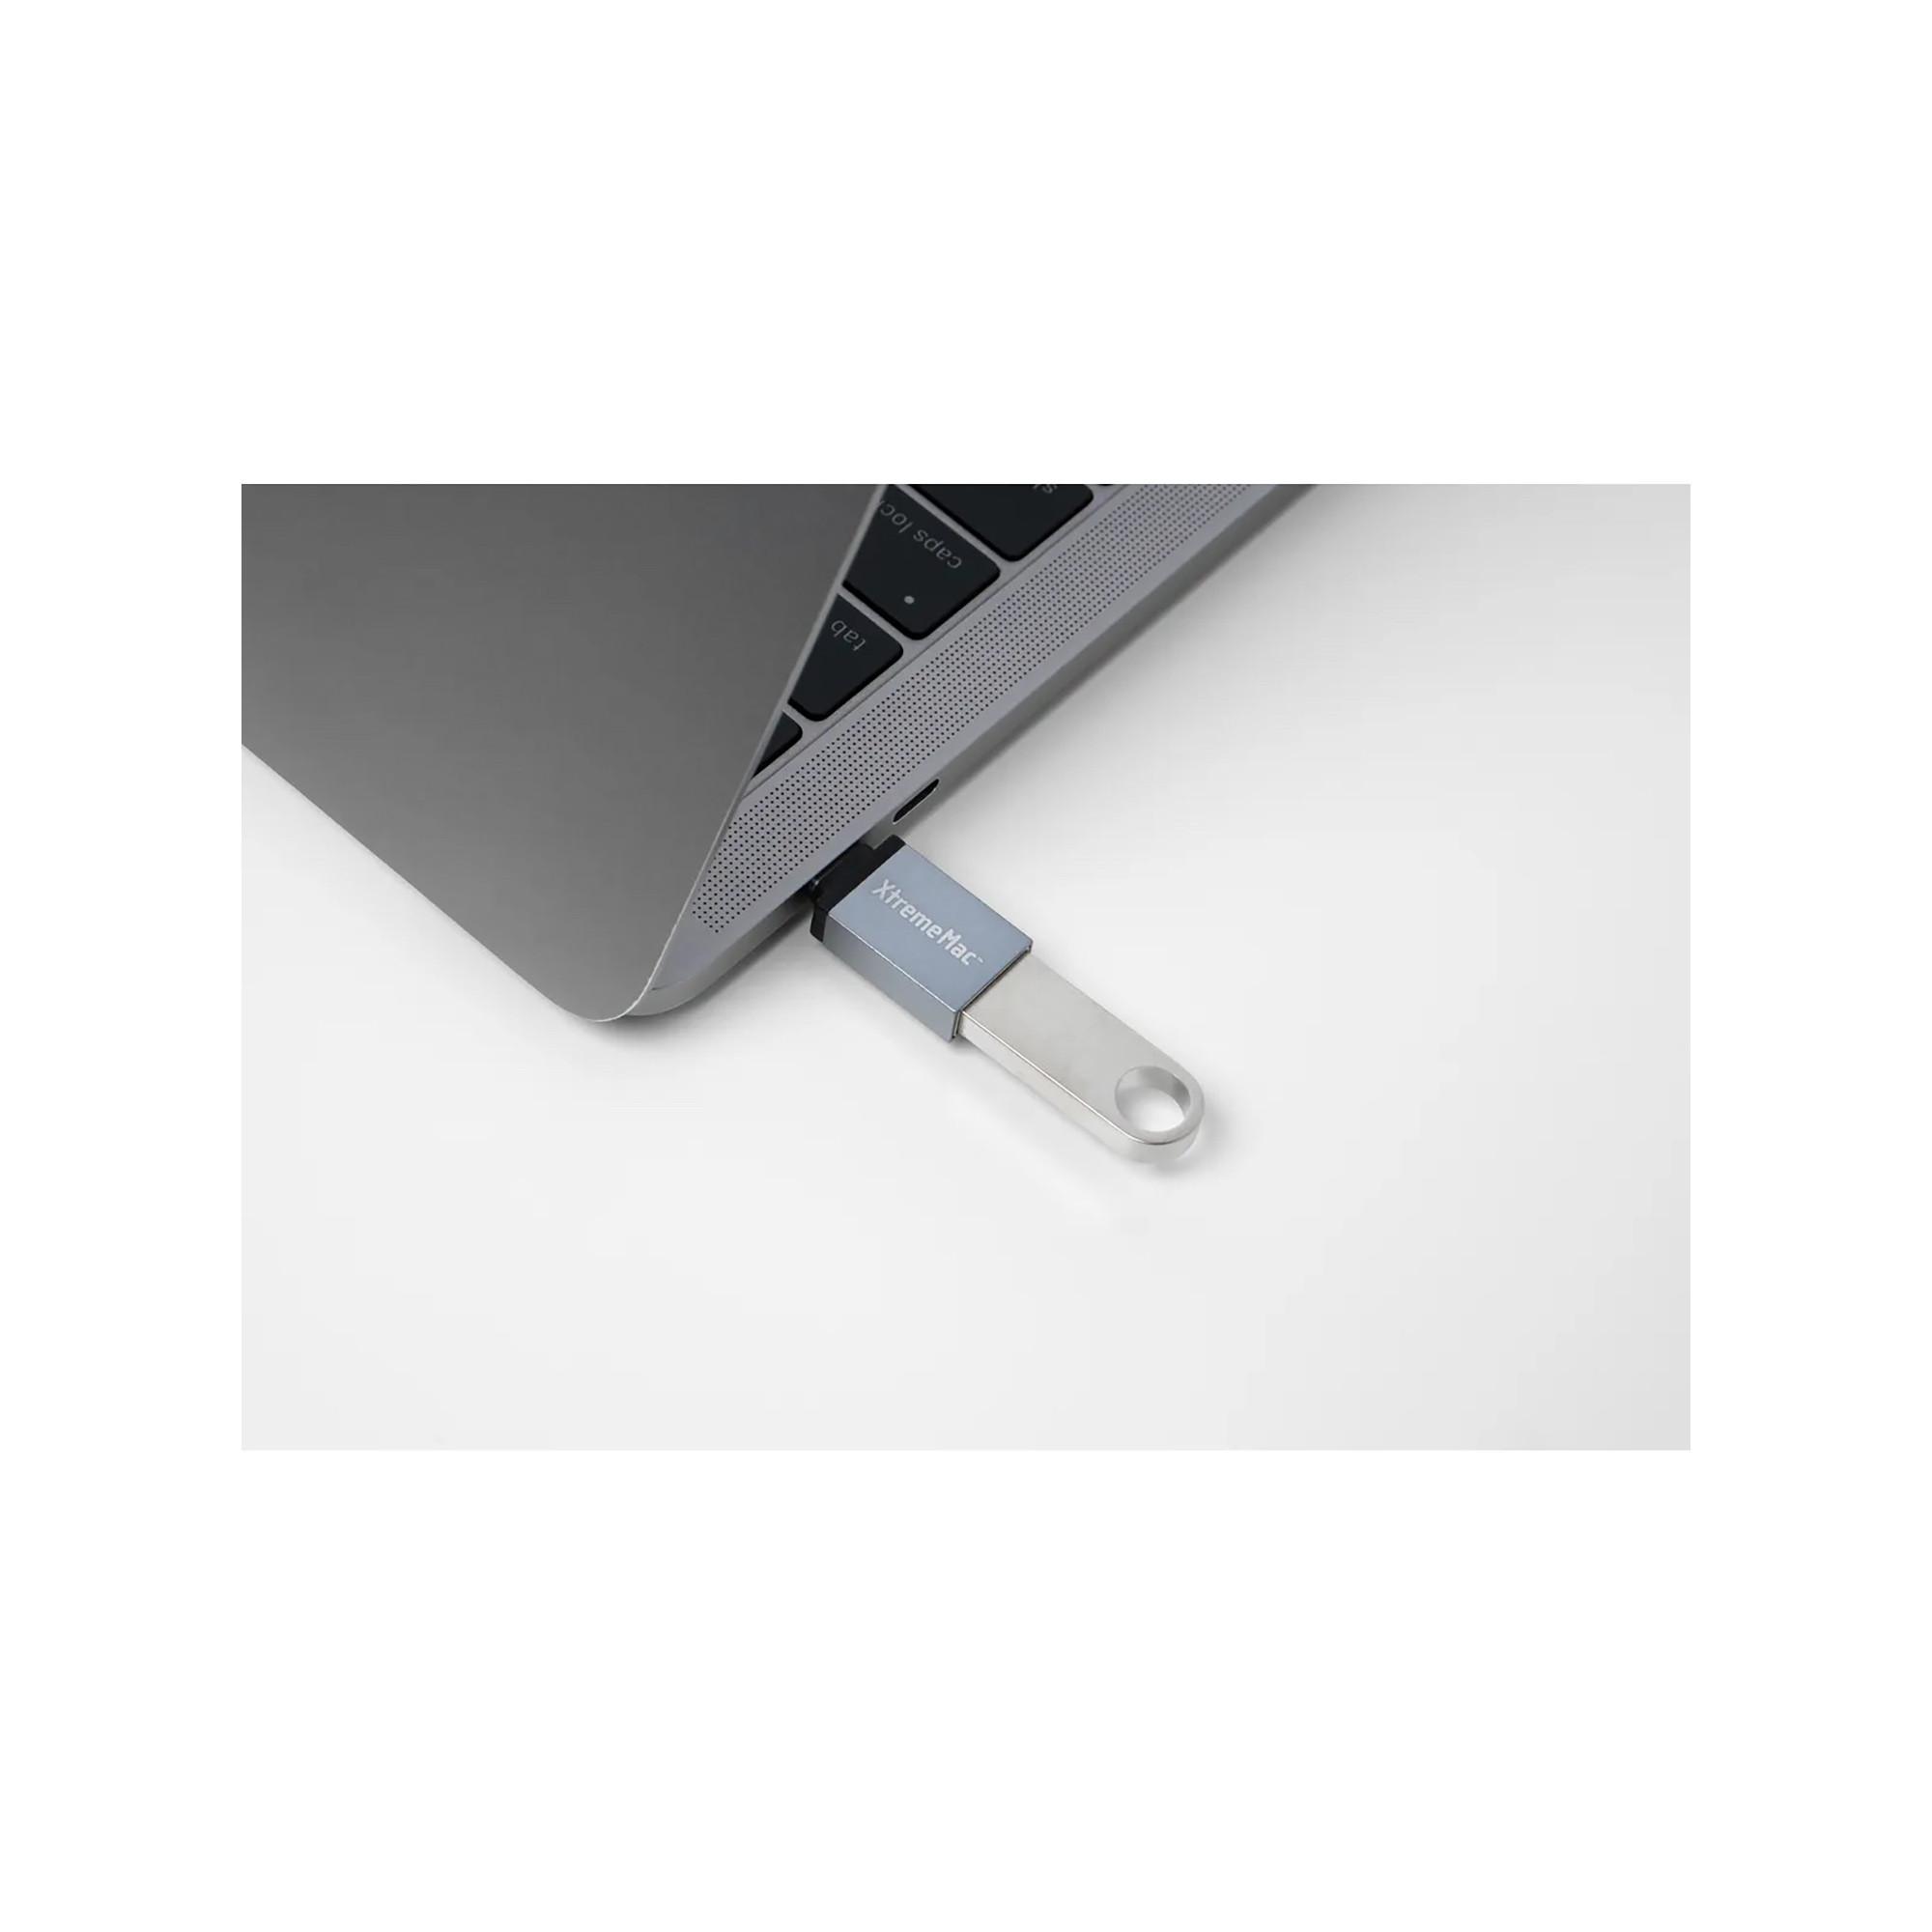 XtremeMac TYPE-C TO USB-A ADAPTER Adaptateur 